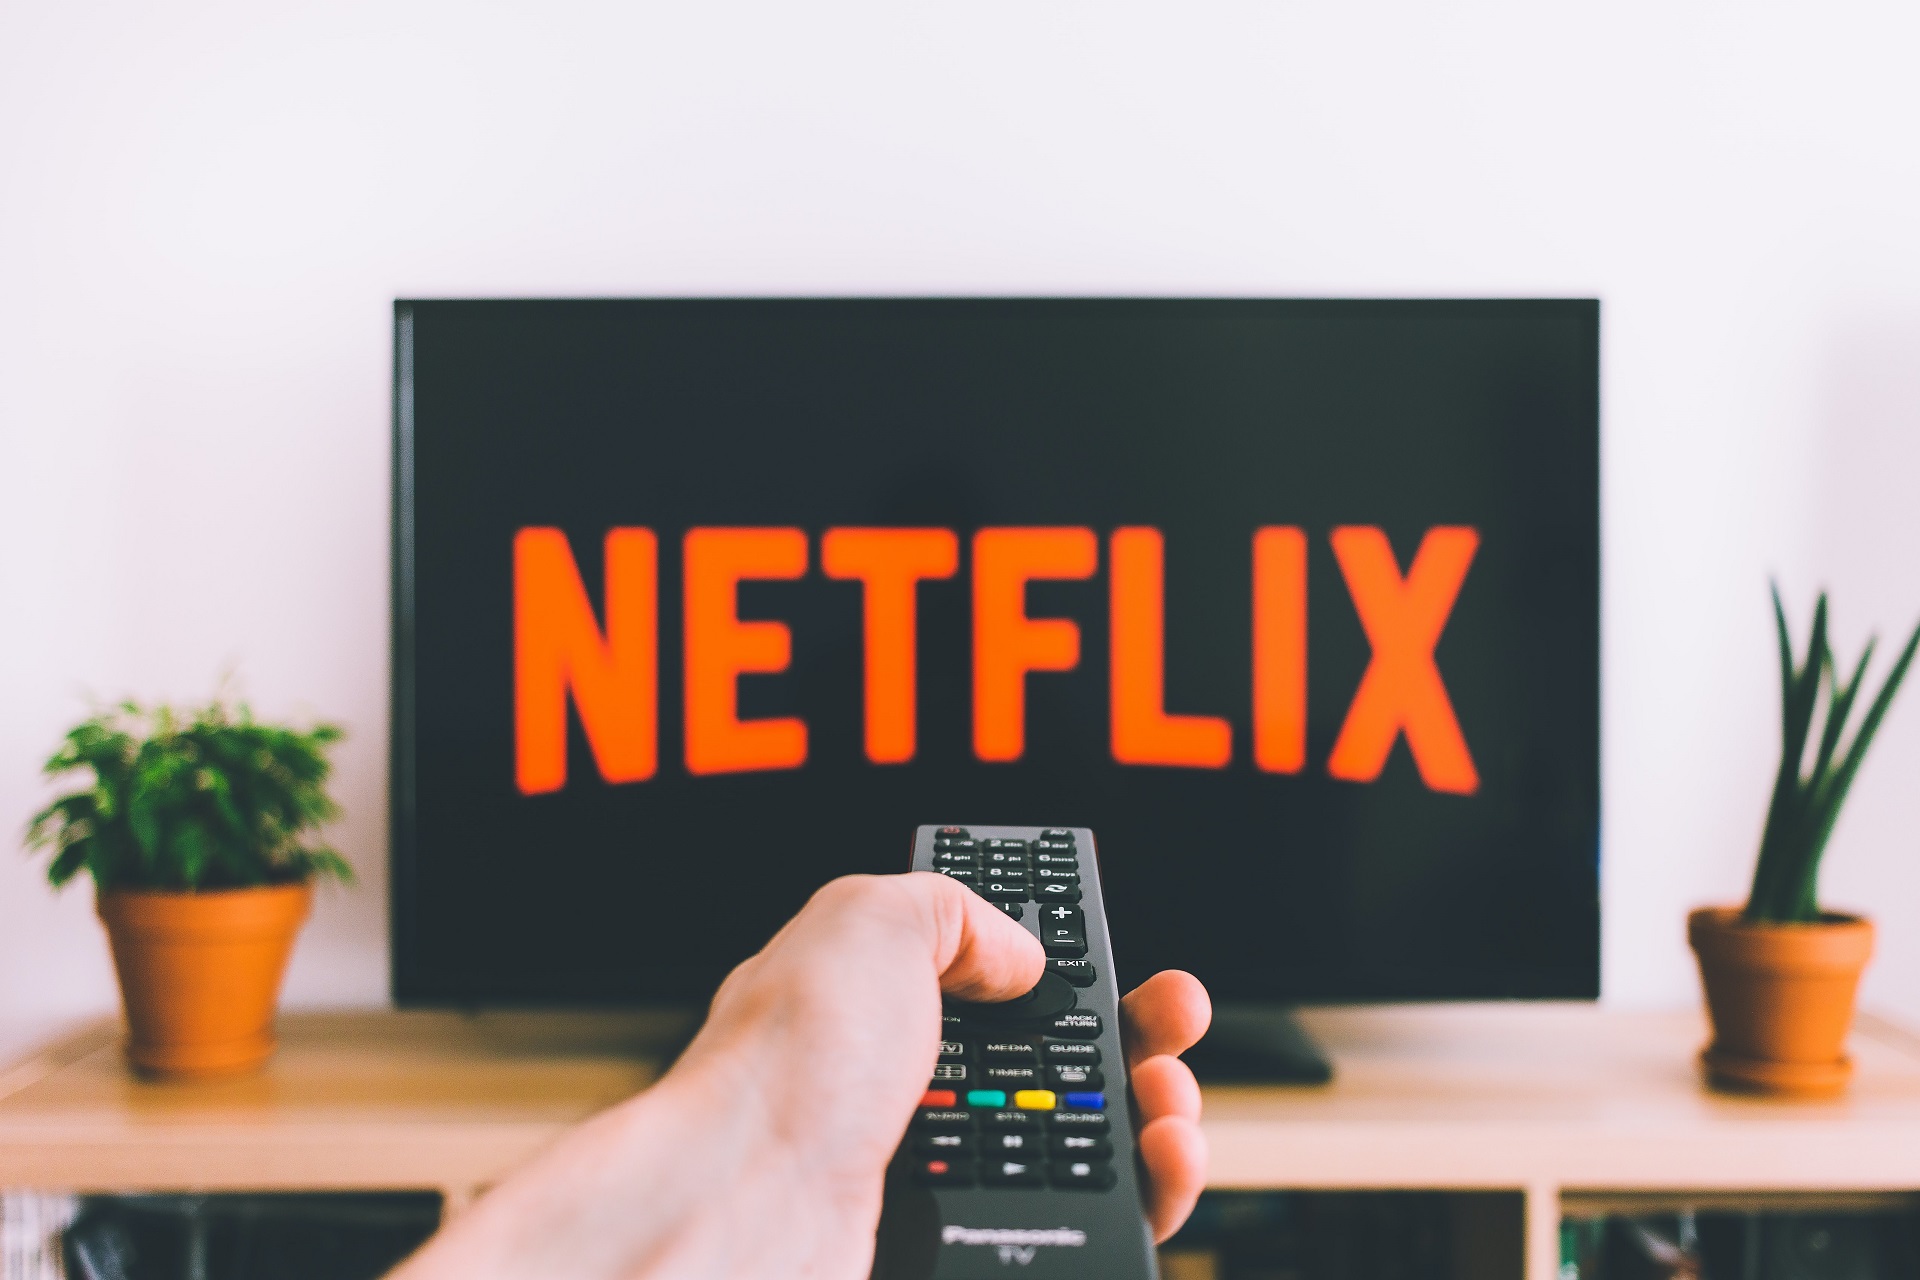 Top 10 TV Streaming Services
